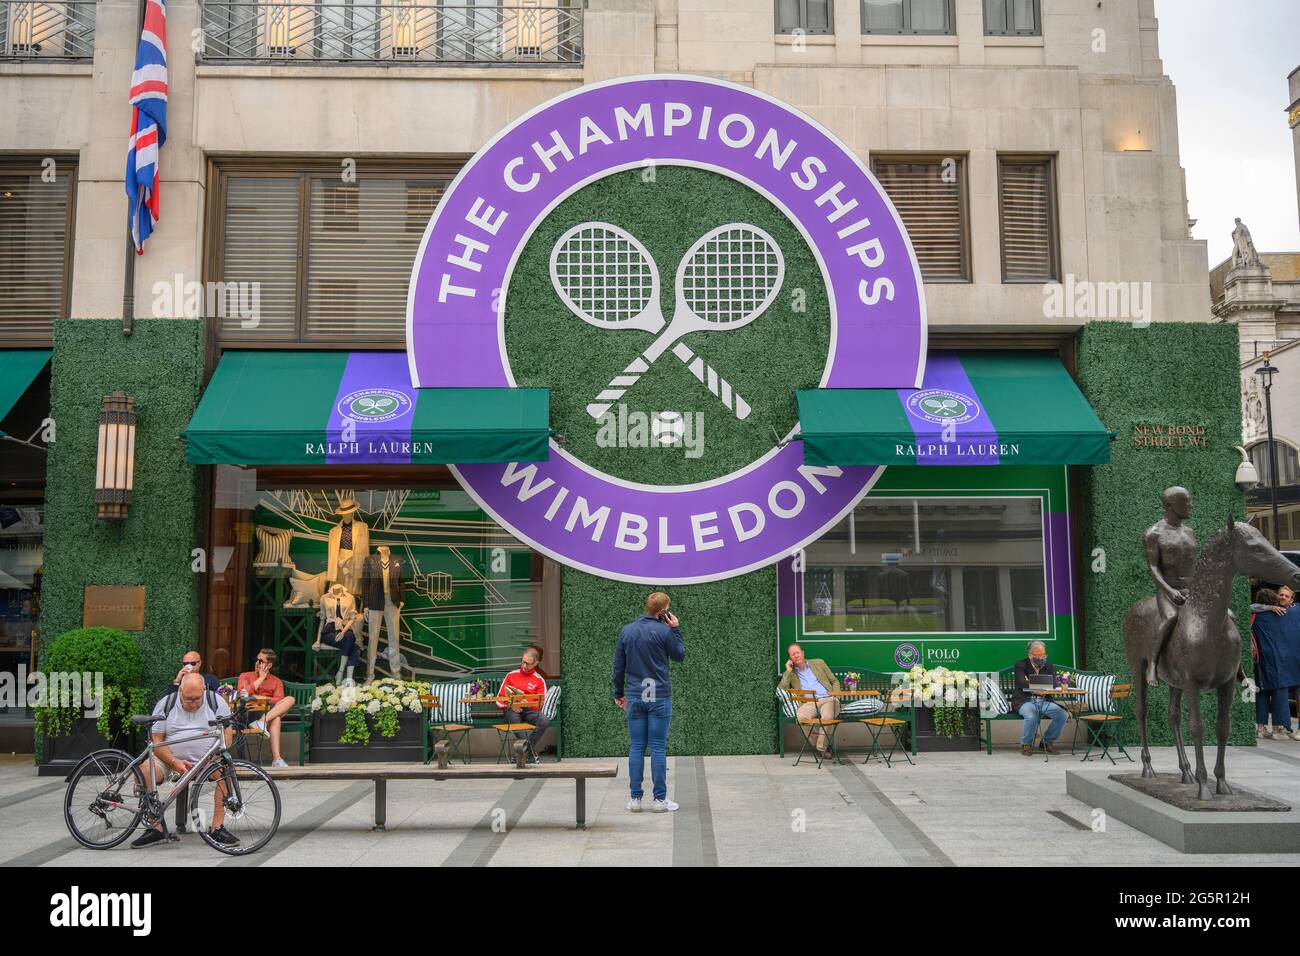 New Bond Street, London, UK. 29 June 2021. Day 2 of the Wimbledon grand slam Tennis Championships with people enjoying the Ralph Lauren outdoor cafe dressed in grass and Wimbledon colours in central London’s fashionable shopping street. Credit: Malcolm Park/Alamy Live News Stock Photo